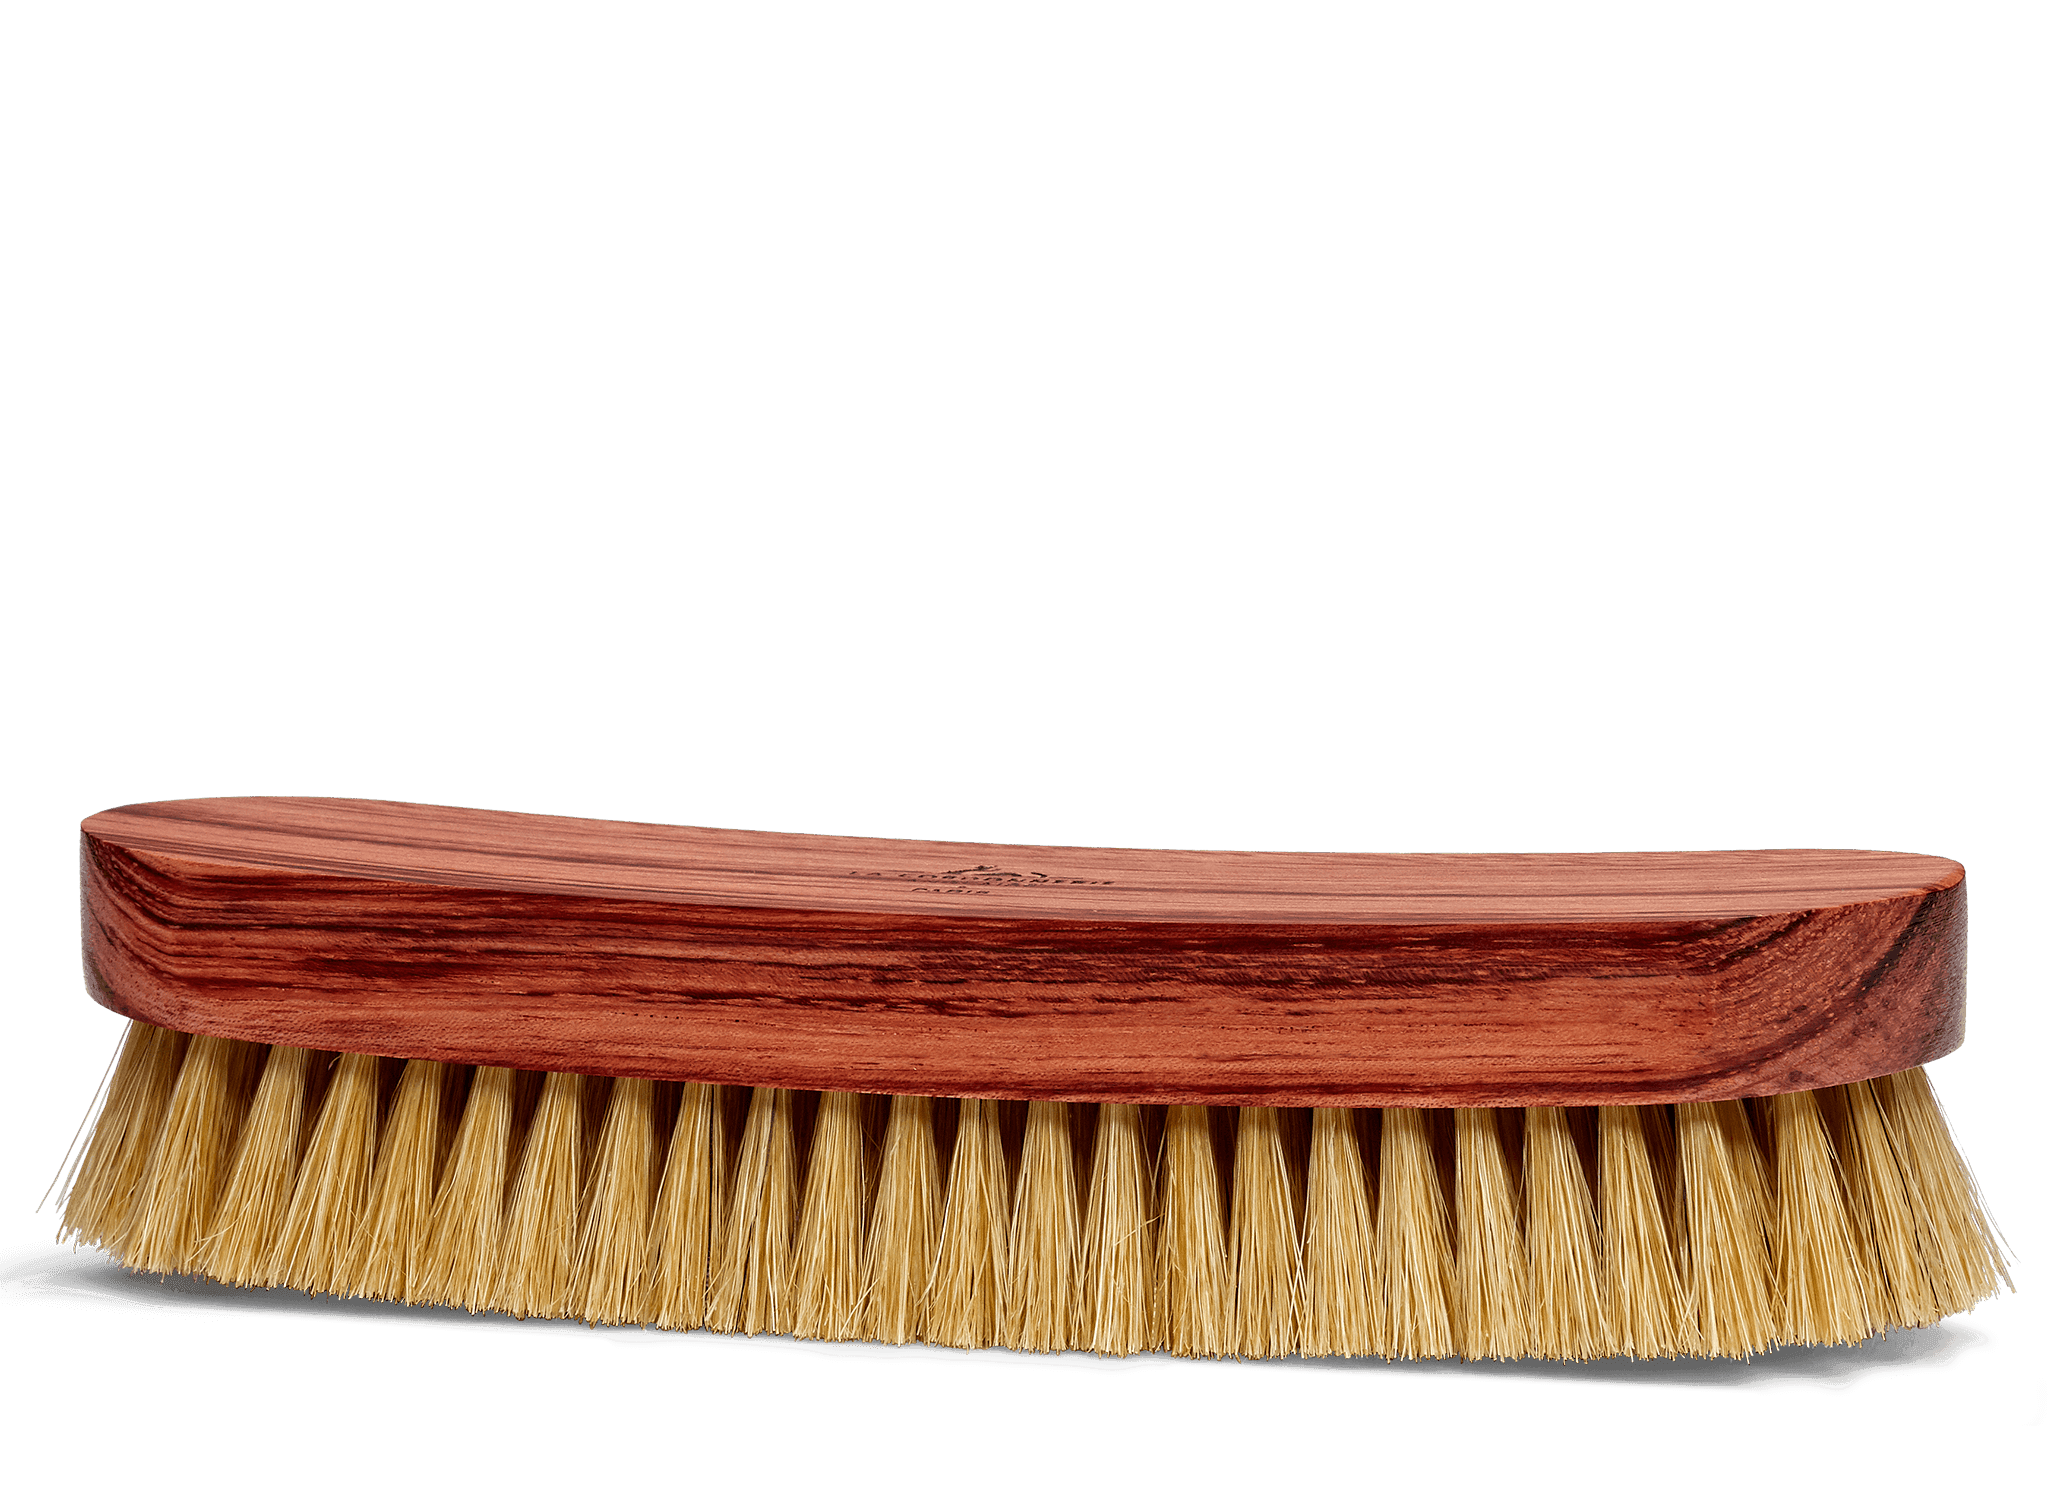 How To Clean Hairbrushes - Into The Gloss